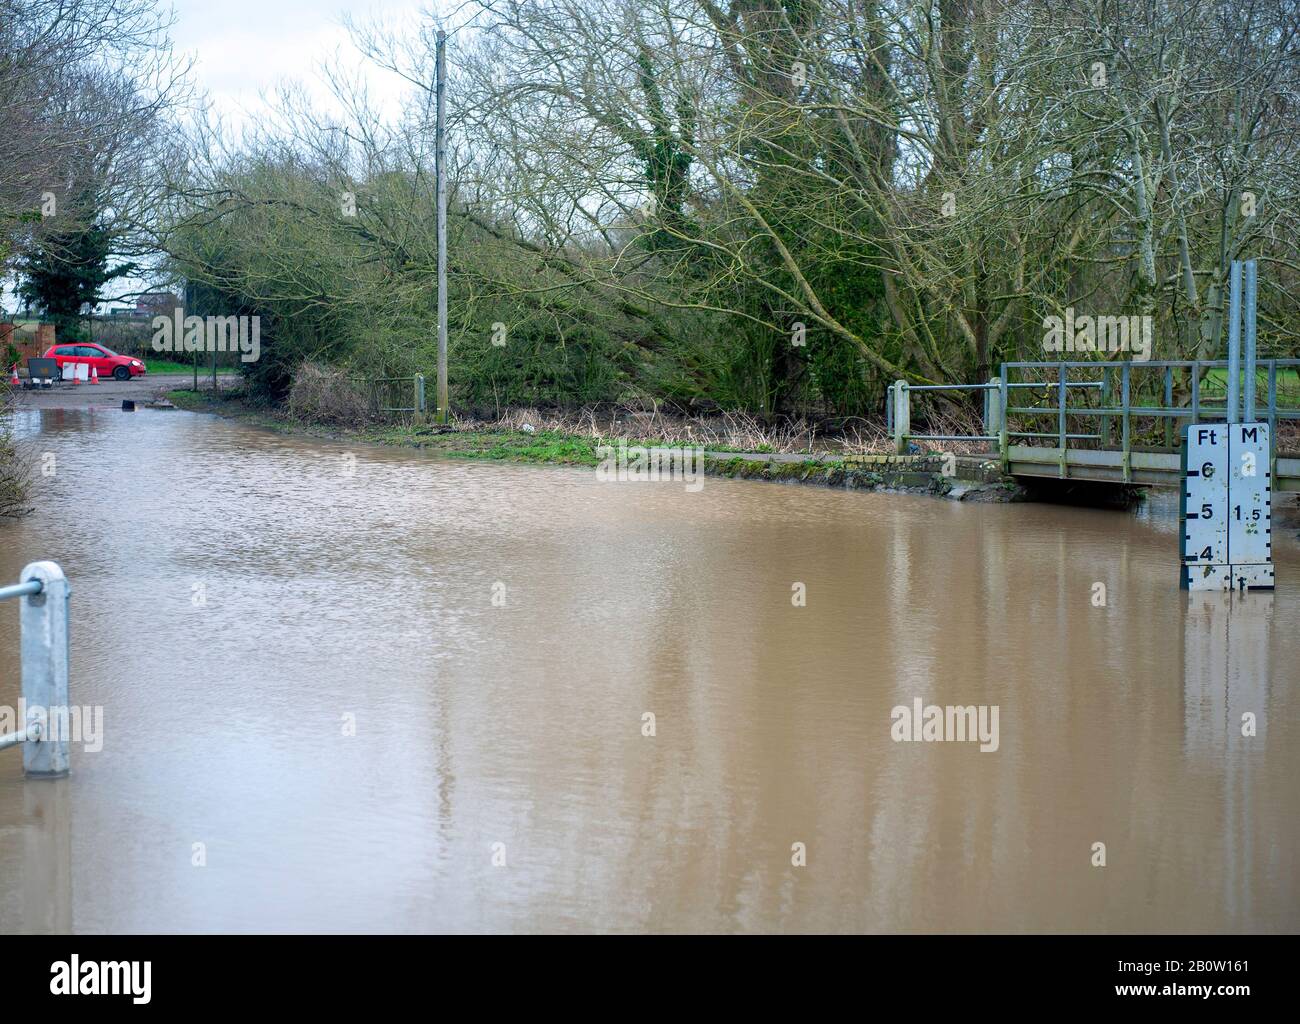 Cars stranded and houses cut-off due to rising flood waters, Watery Gate Lane, Leicestershire, UK. Stock Photo